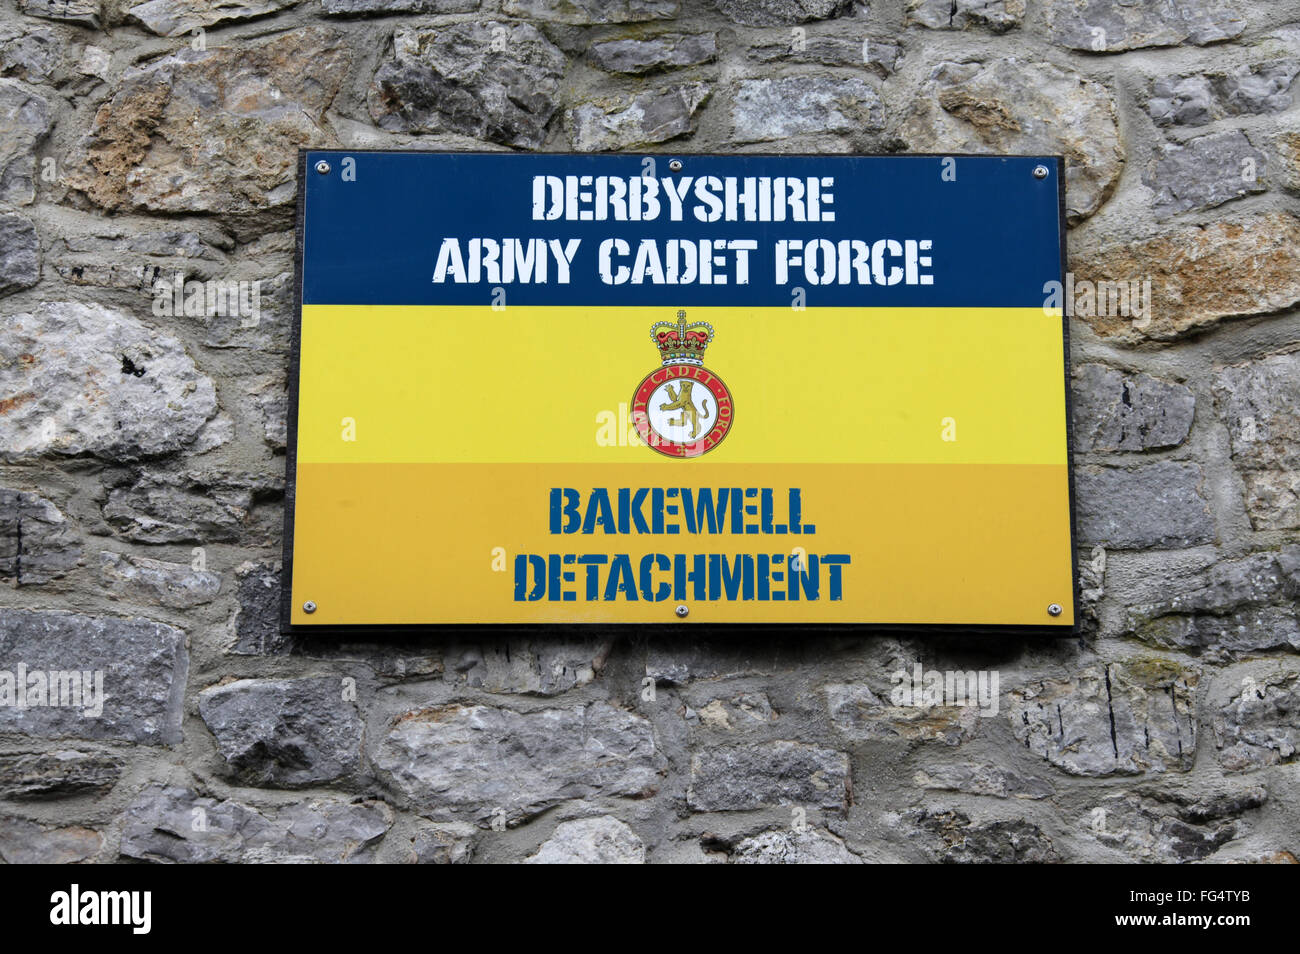 Derbyshire Army Cadet Force Sign at Bakewell Stock Photo